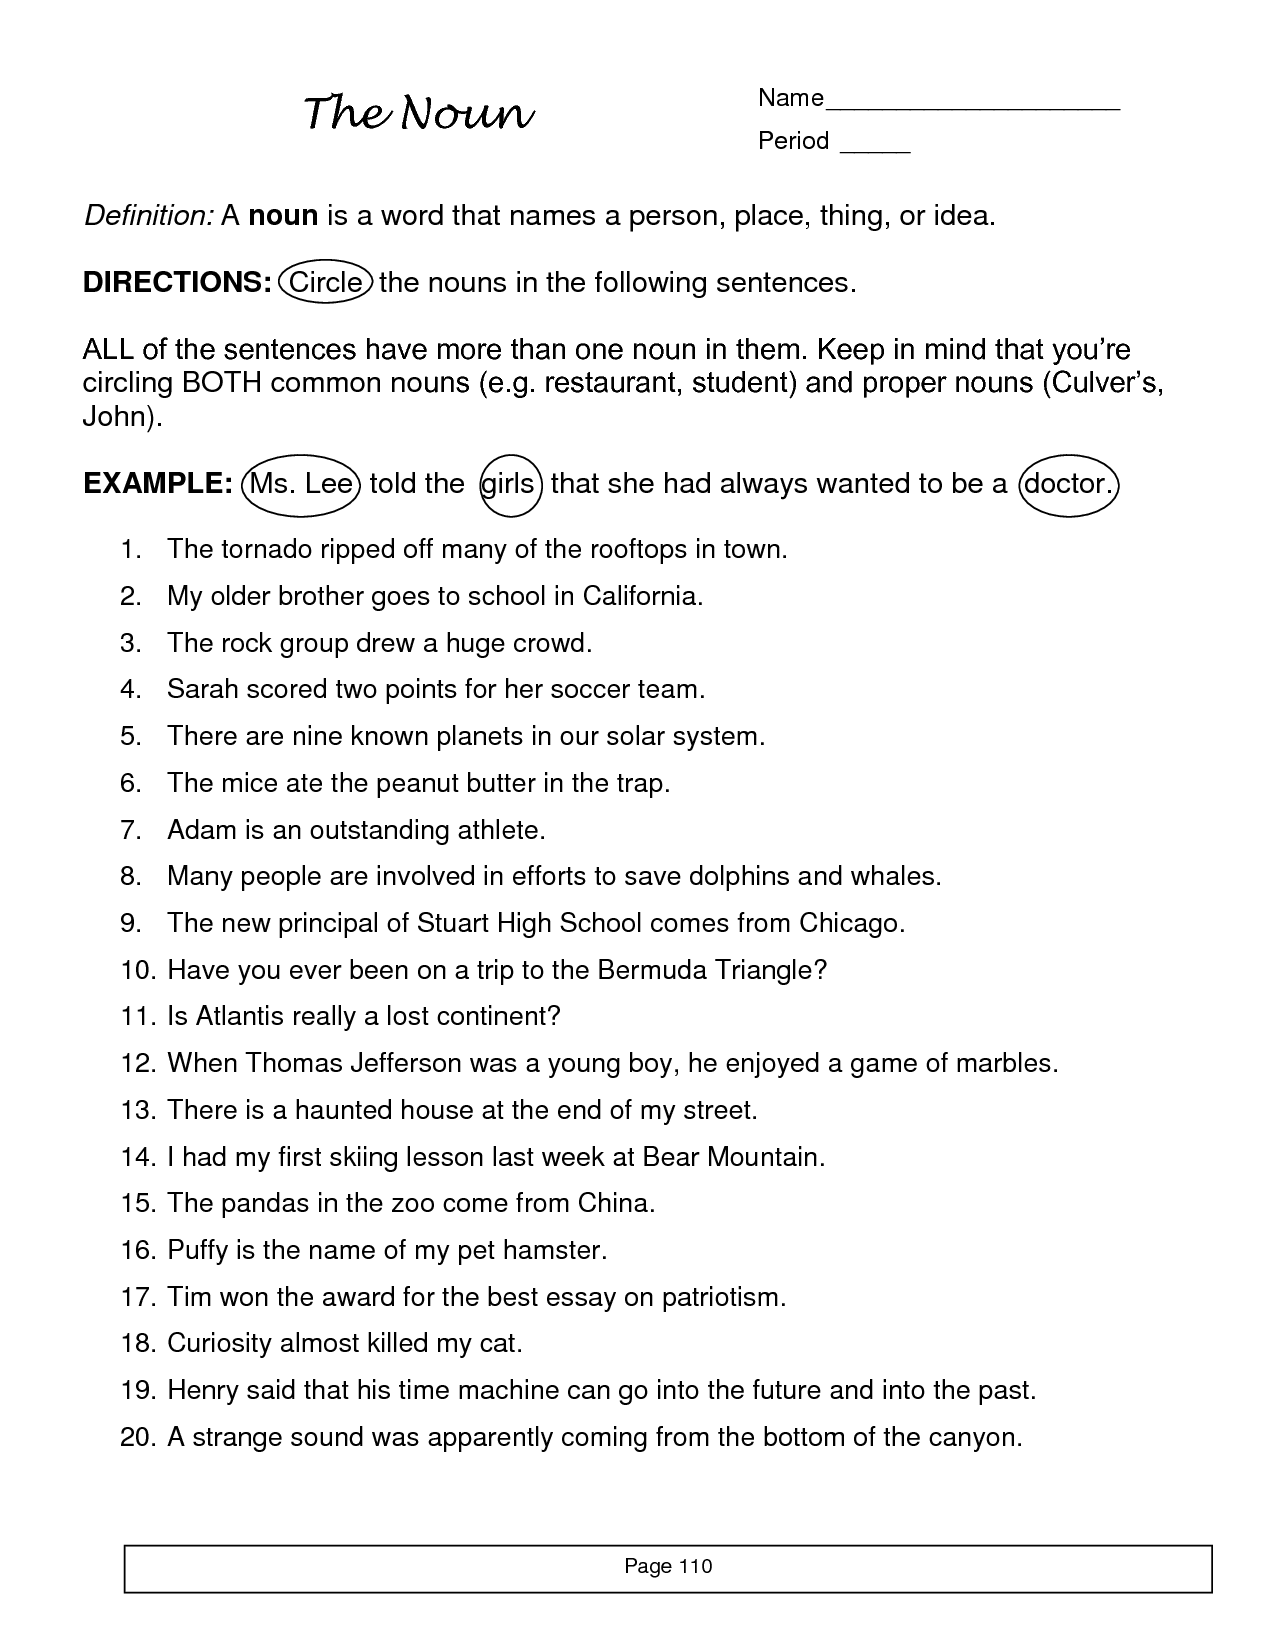 Action and Linking Verbs Worksheet 4th Grade Image